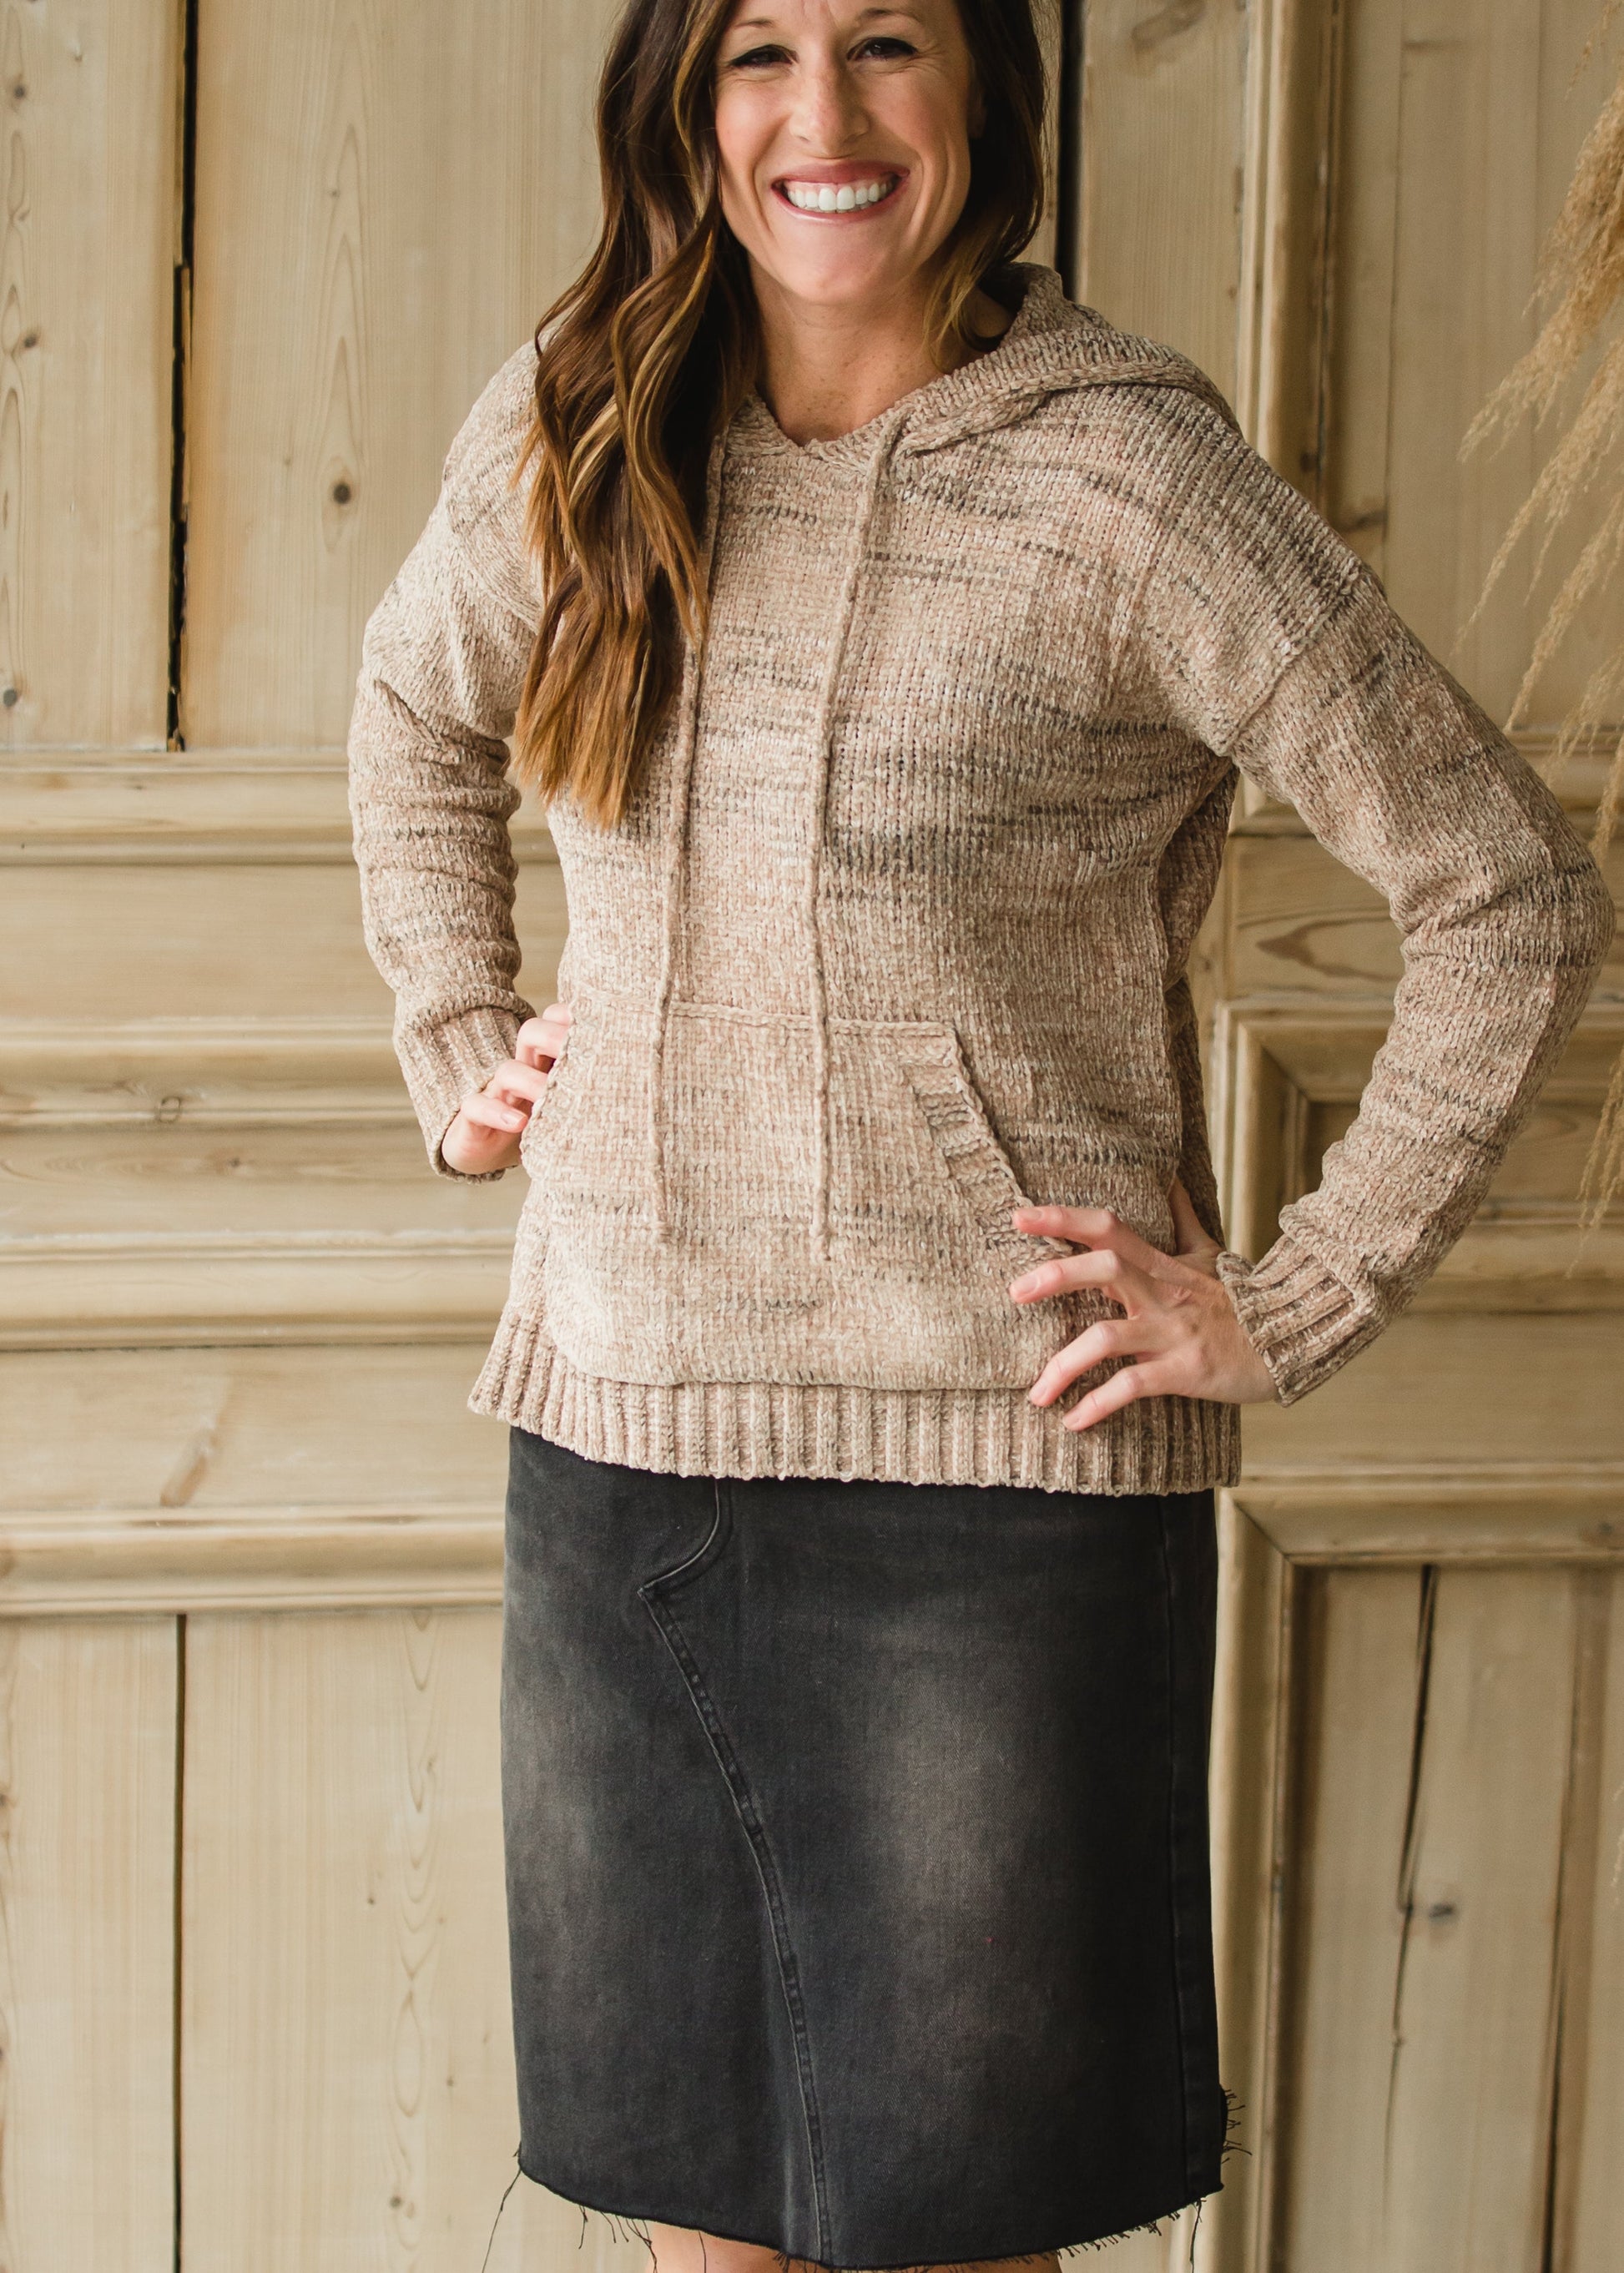 Cozy Chenille Hooded Sweater - FINAL SALE Shirt